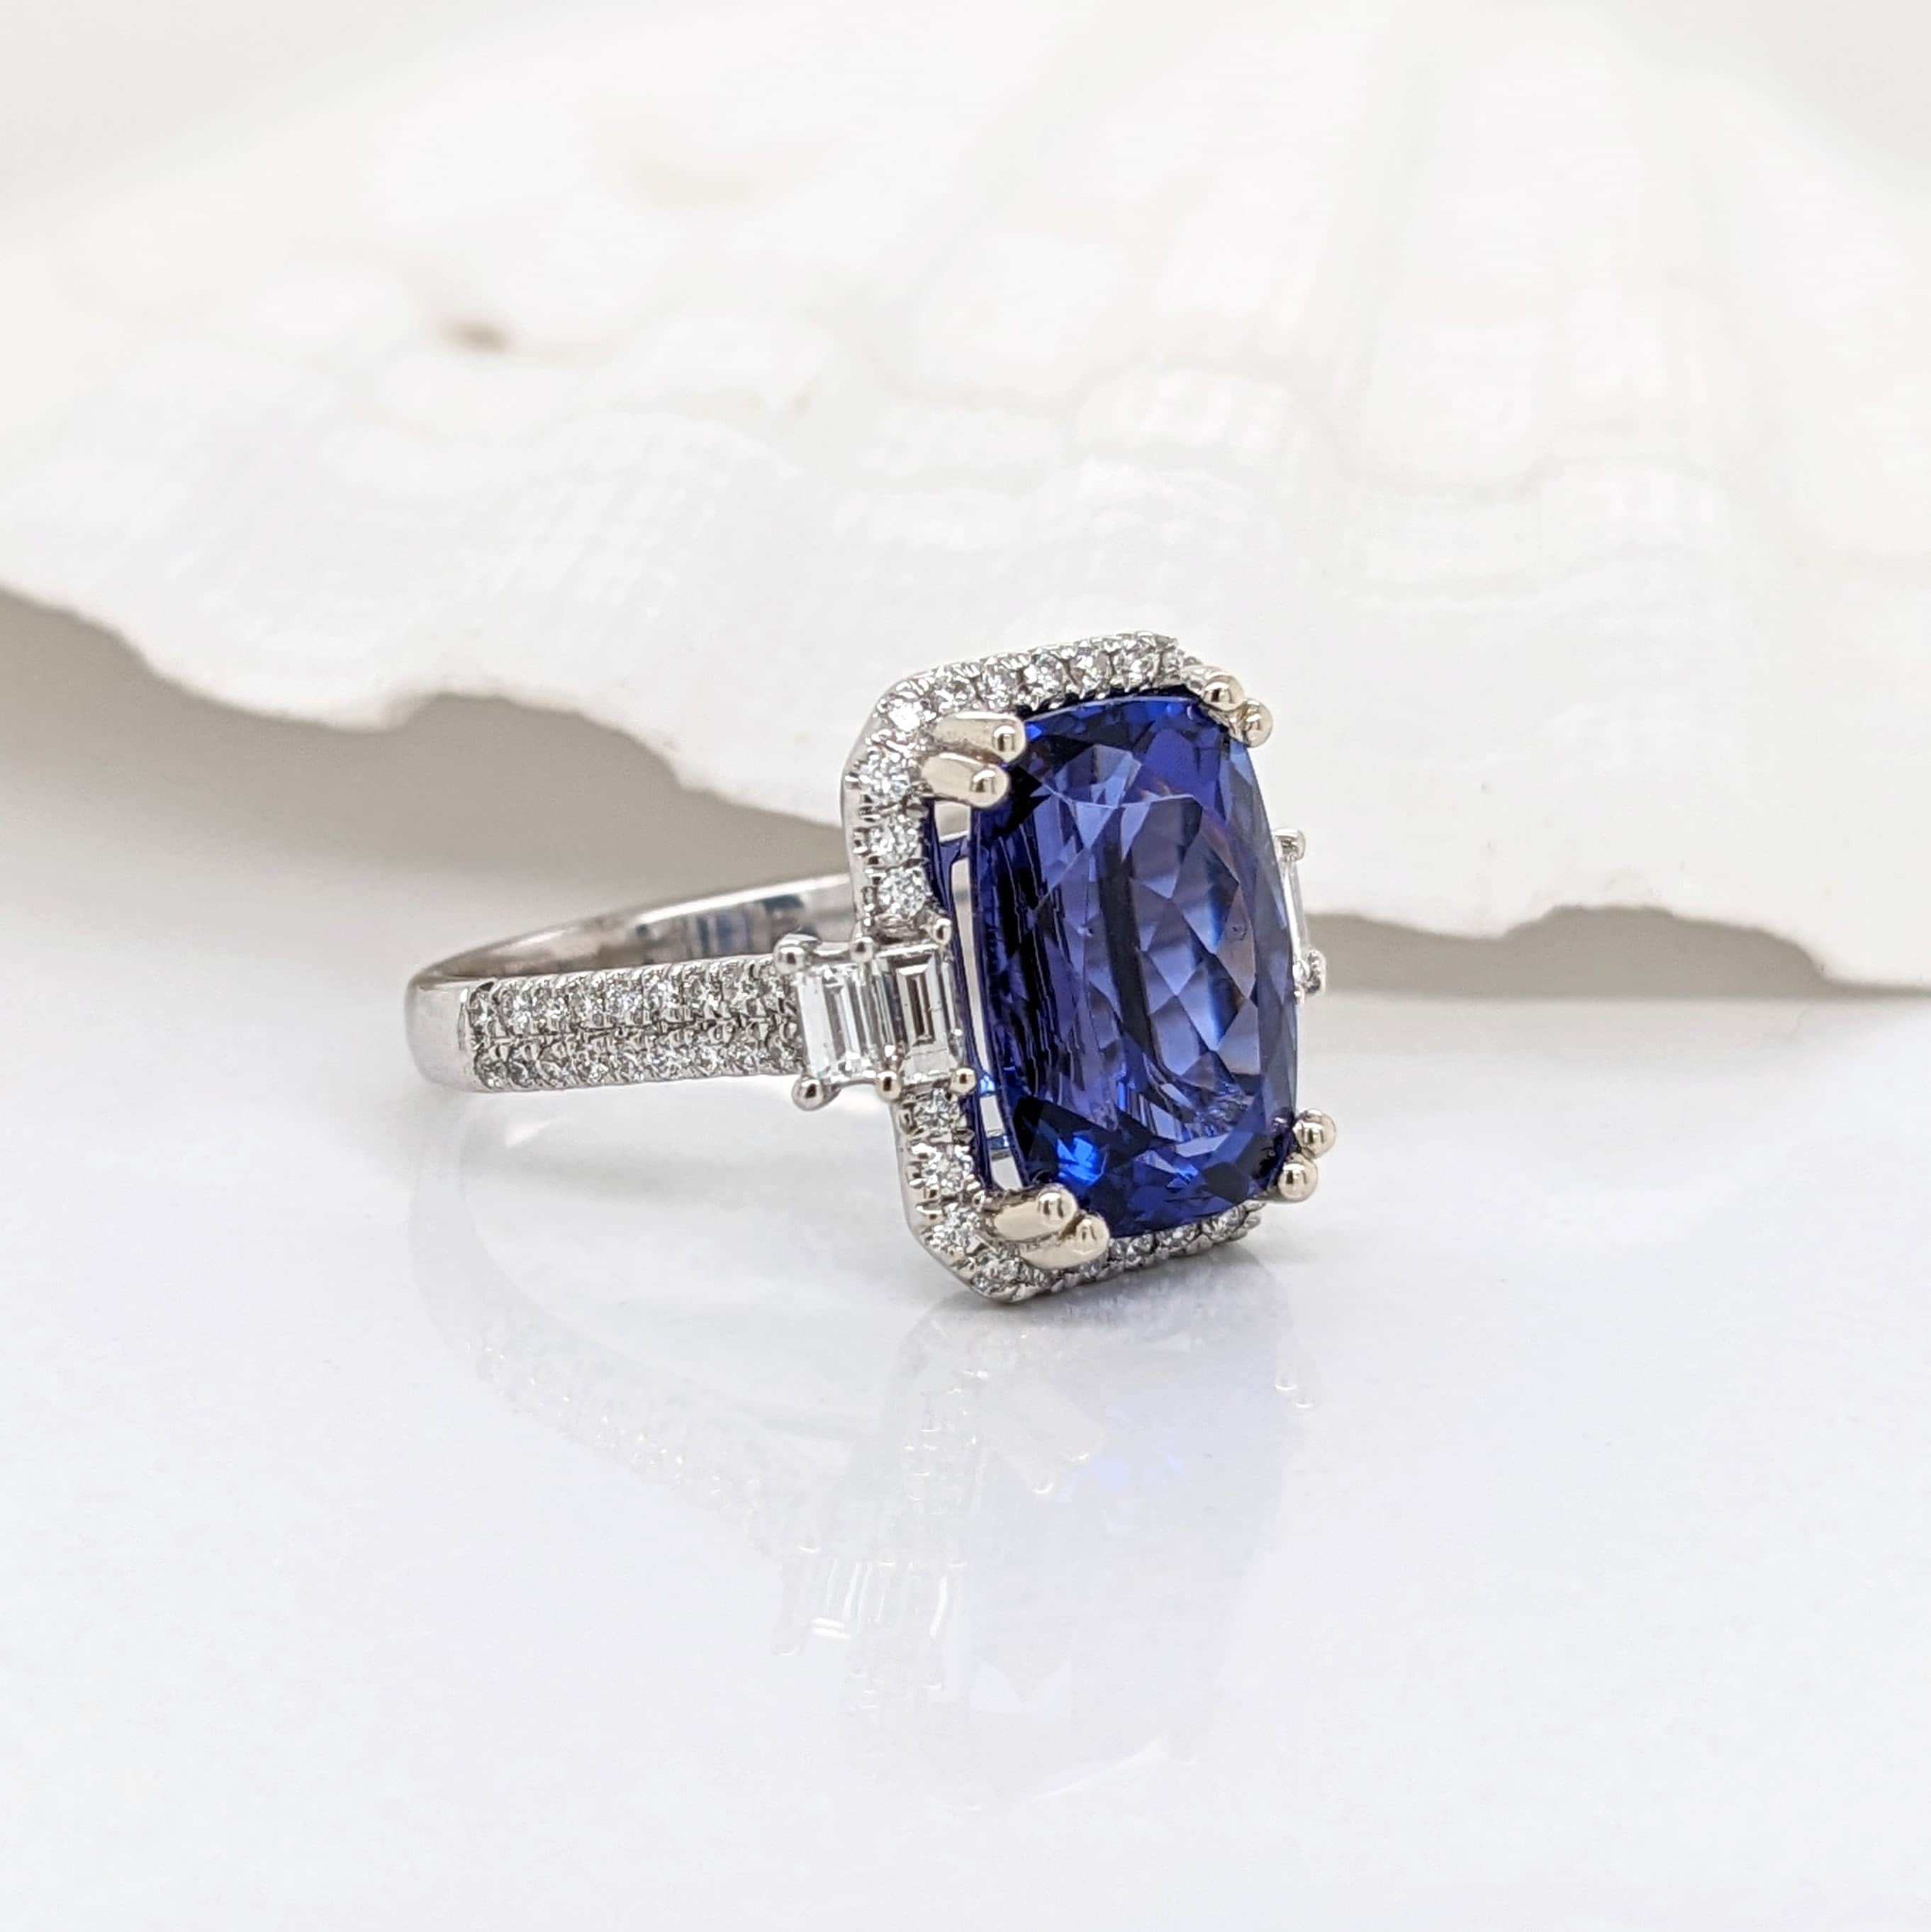 Statement Rings-6.5carat Tanzanite AAAA color in 14k Solid White Gold w Natural Diamonds || Cushion Cut 12x8mm || December Birthstone || Customizable || - NNJGemstones